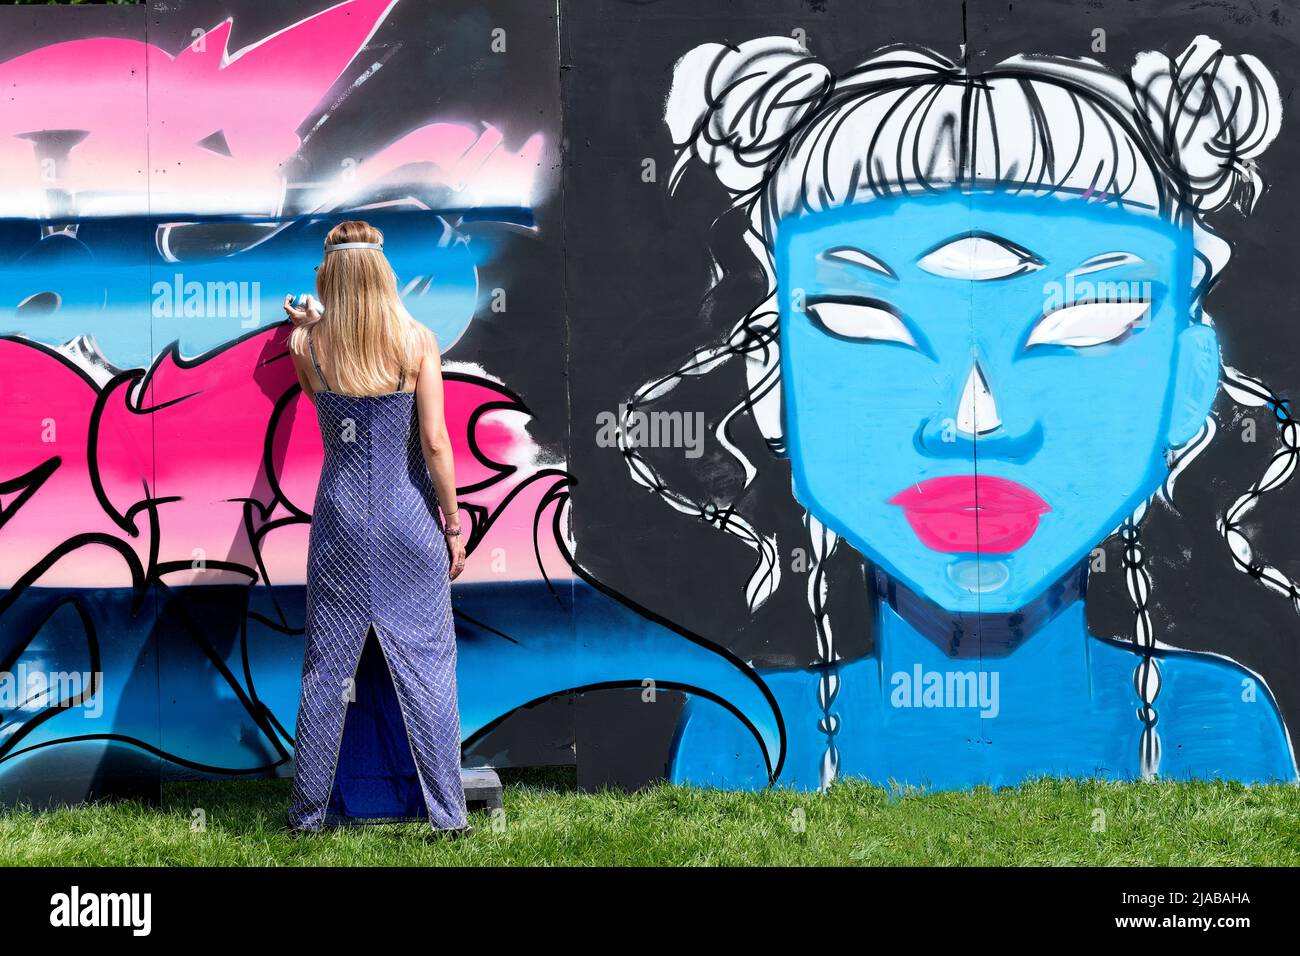 Bristol, UK. 28th May 2022. A female street artist, wearing an evening dress, works on a large mural during the Bristol Upfest street art festival Stock Photo